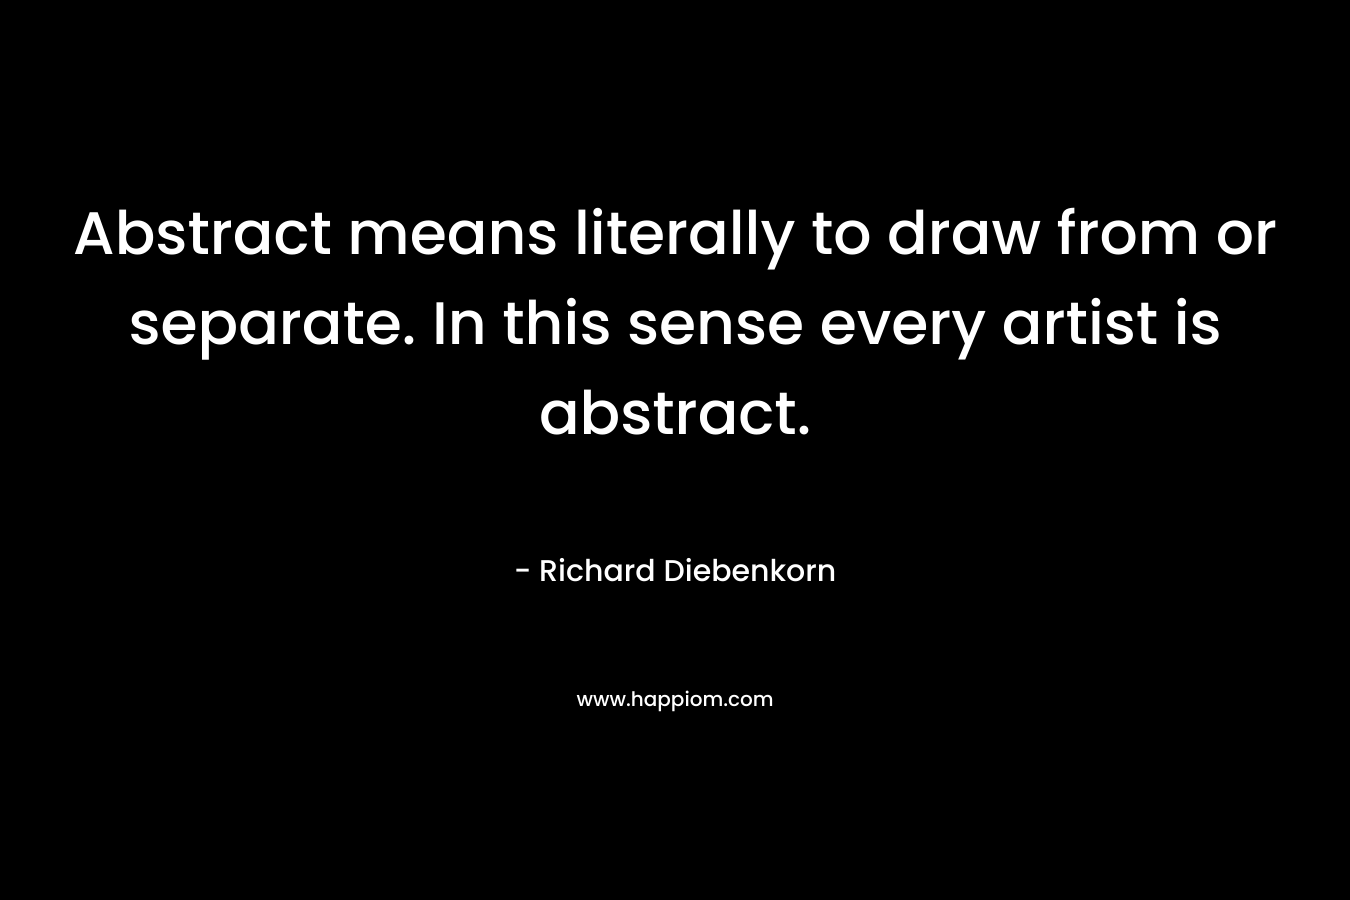 Abstract means literally to draw from or separate. In this sense every artist is abstract.